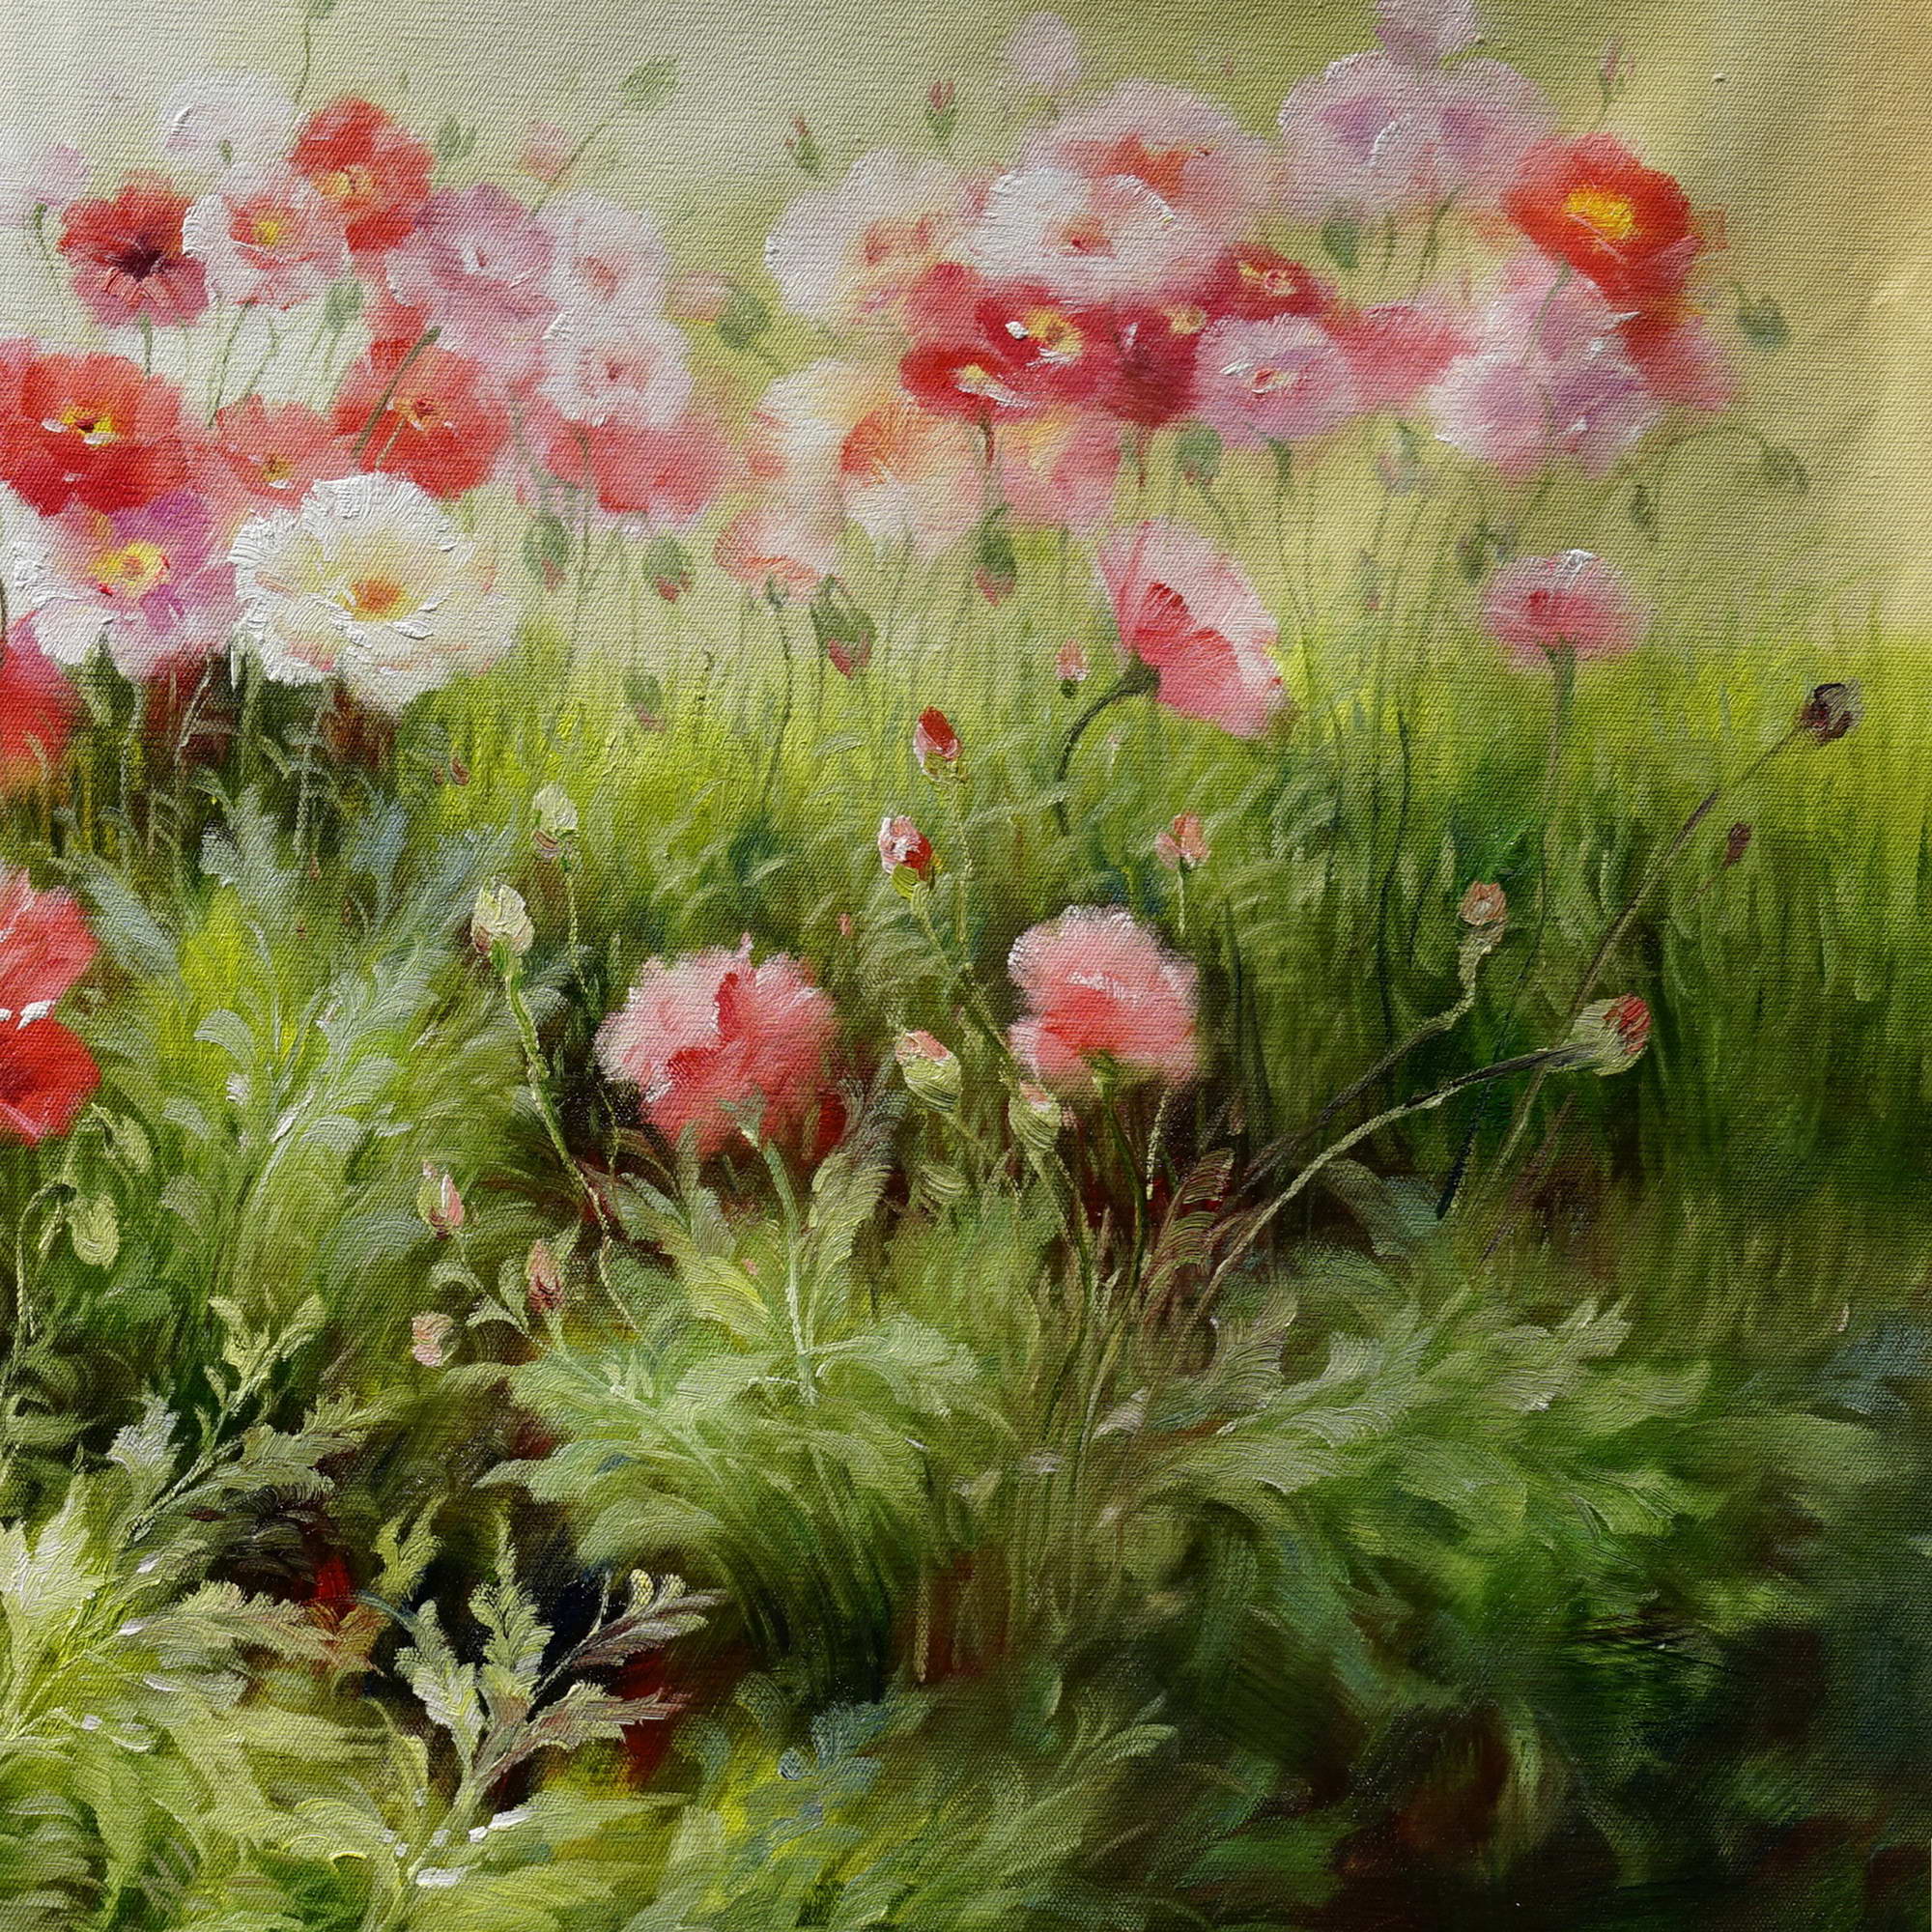 Hand painted Field of flowers 75x150cm